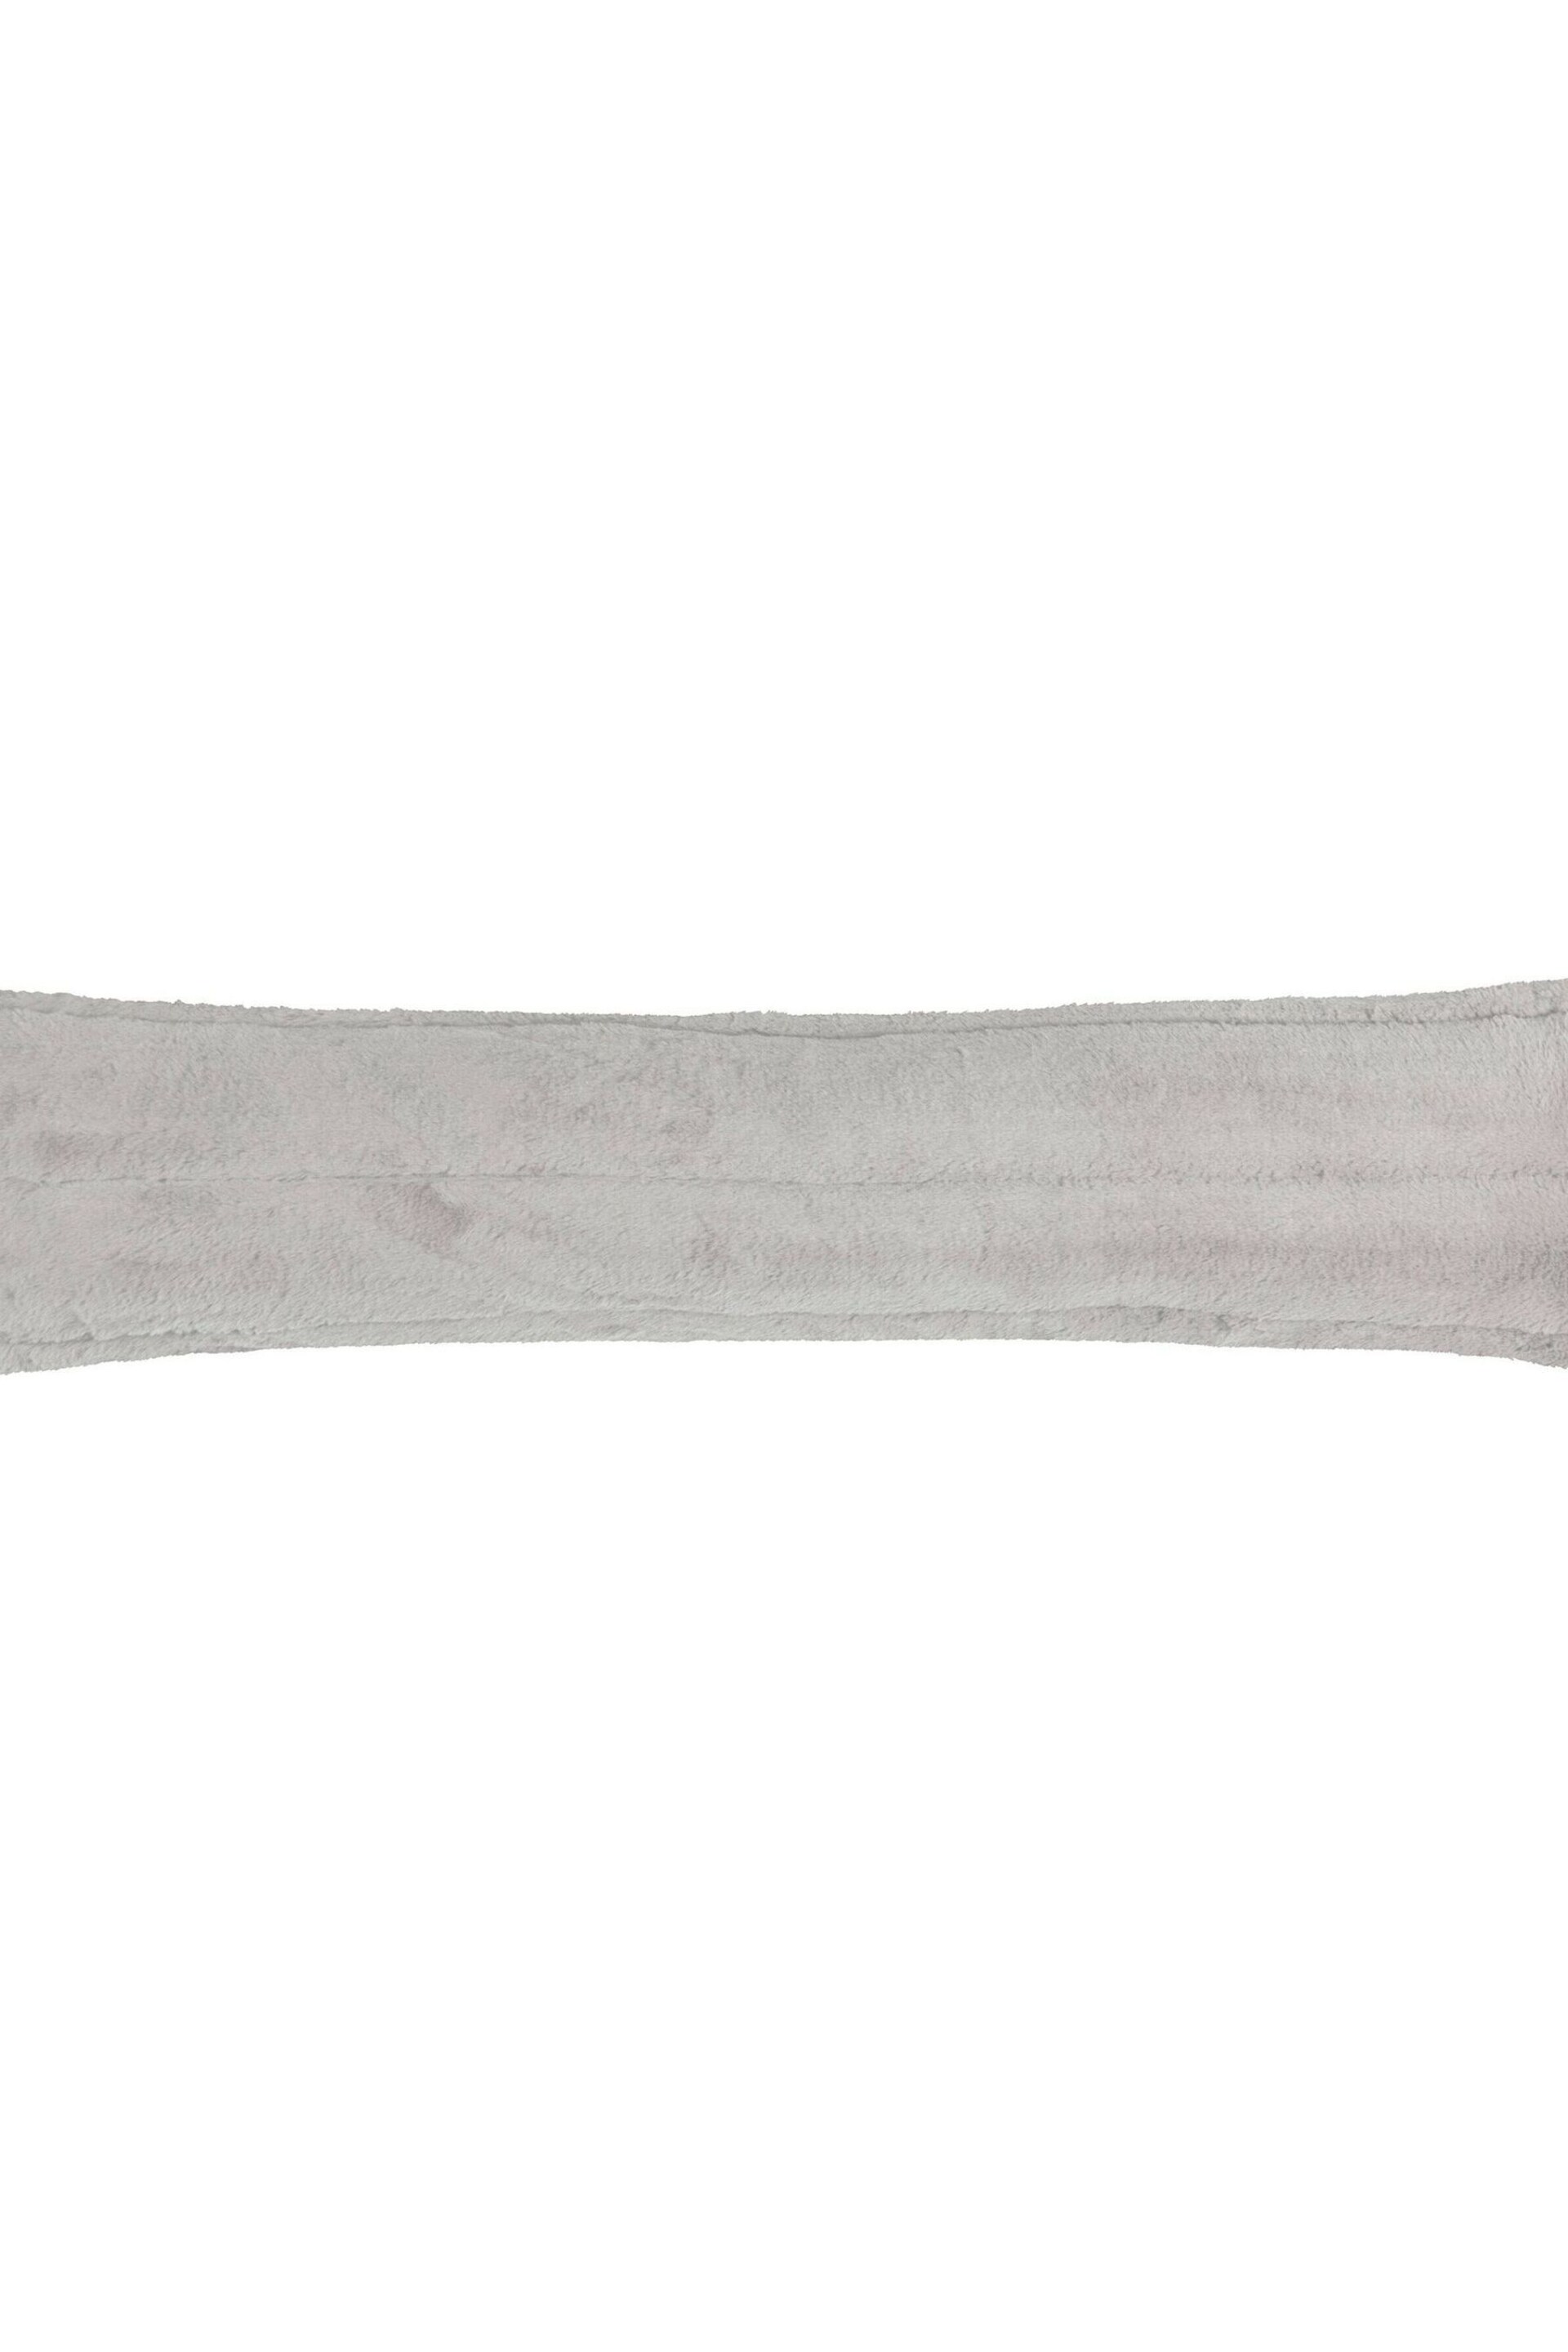 Paoletti Grey Empress Faux Fur Draught Excluder - Image 2 of 3